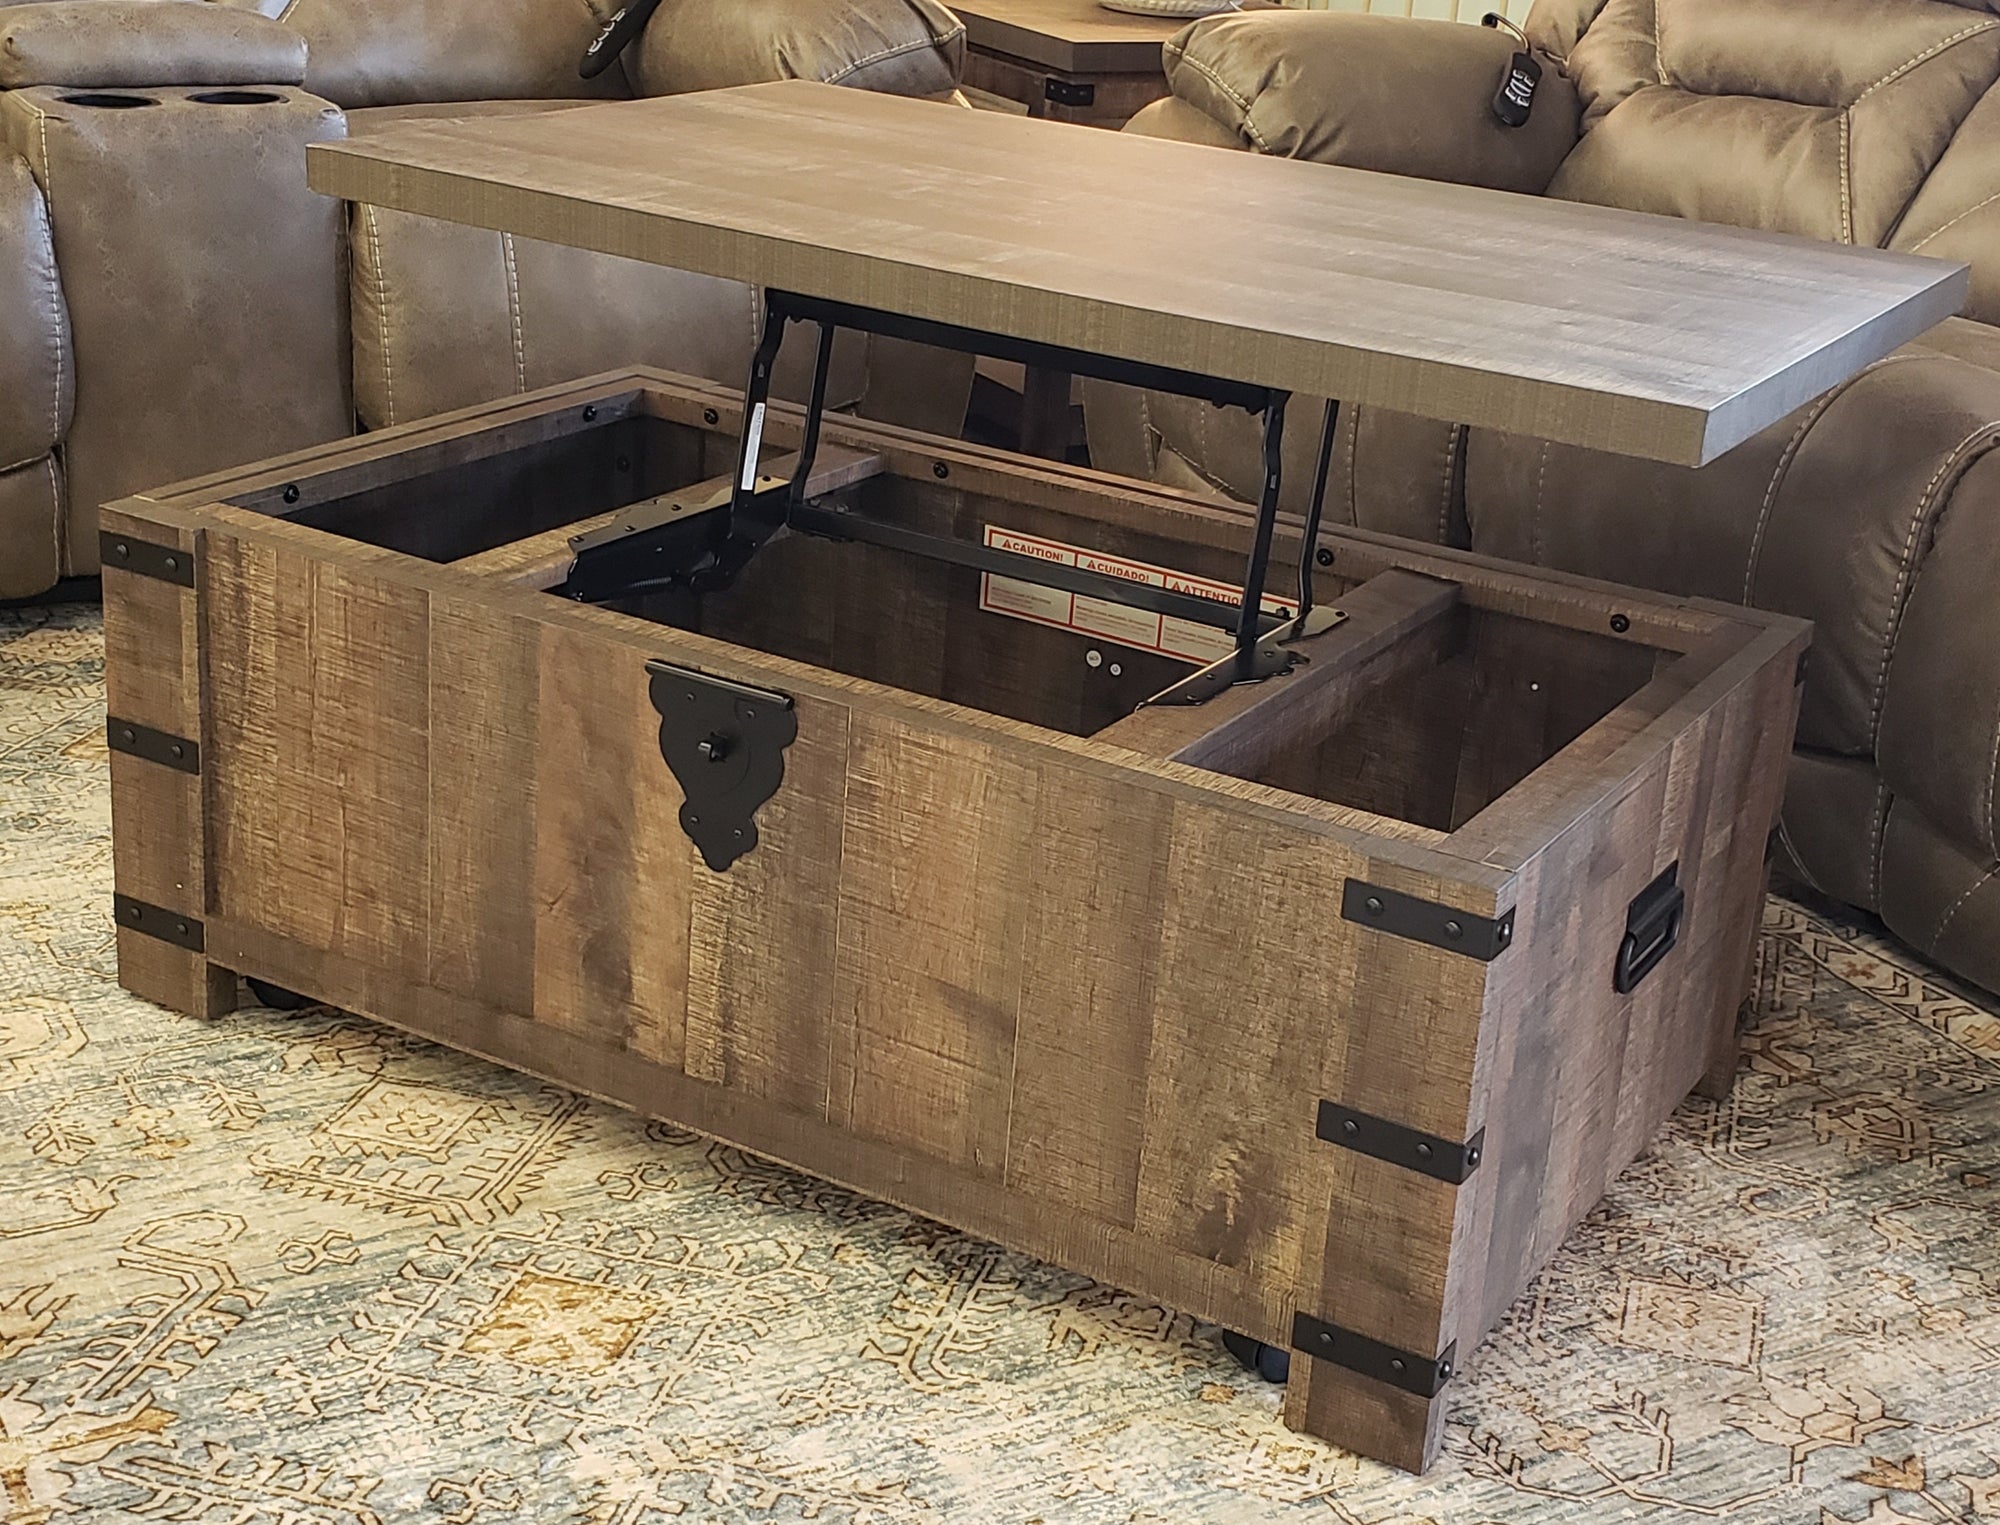 T577 FI-A Lift Top Coffee Table